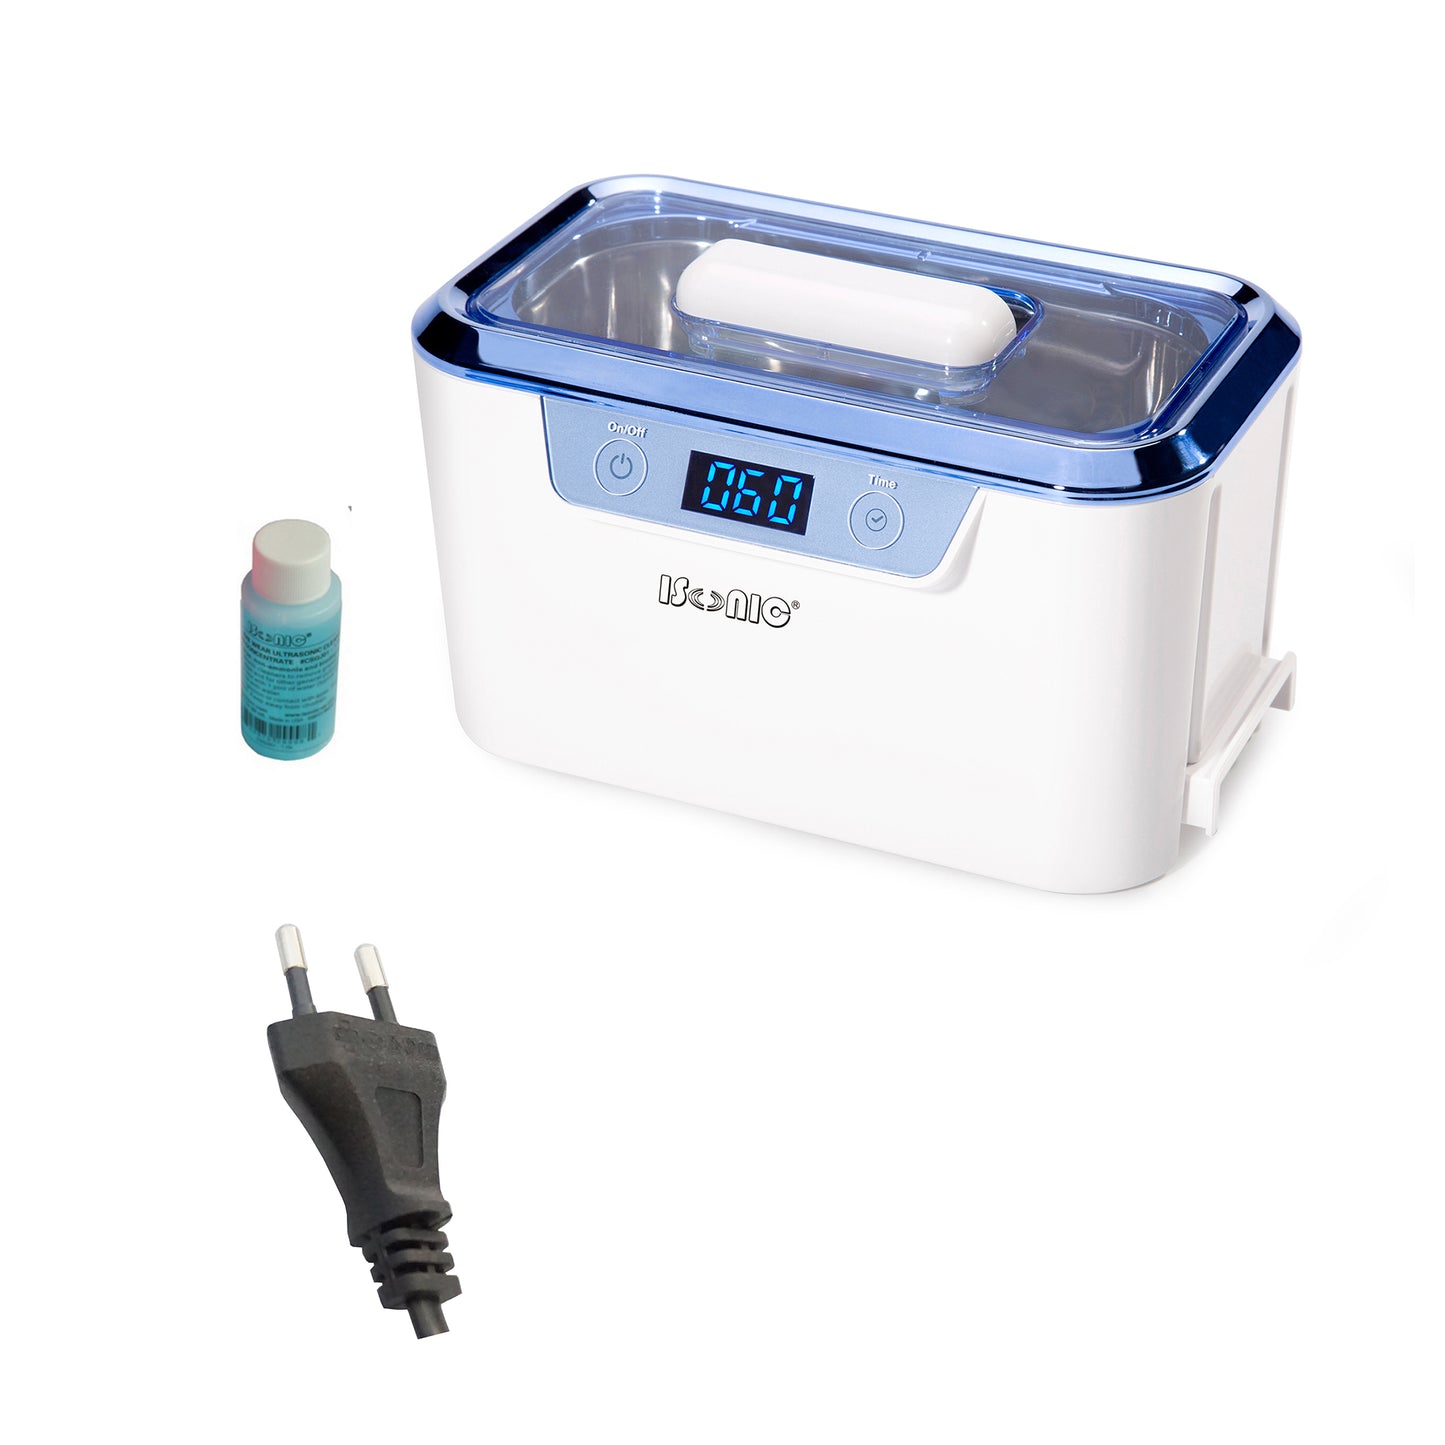 DS310B-WS | iSonic® Miniaturized Commercial Ultrasonic Cleaner, white and sapphire blue colors, for eyeglasses, ophthalmology instruments, jewelry